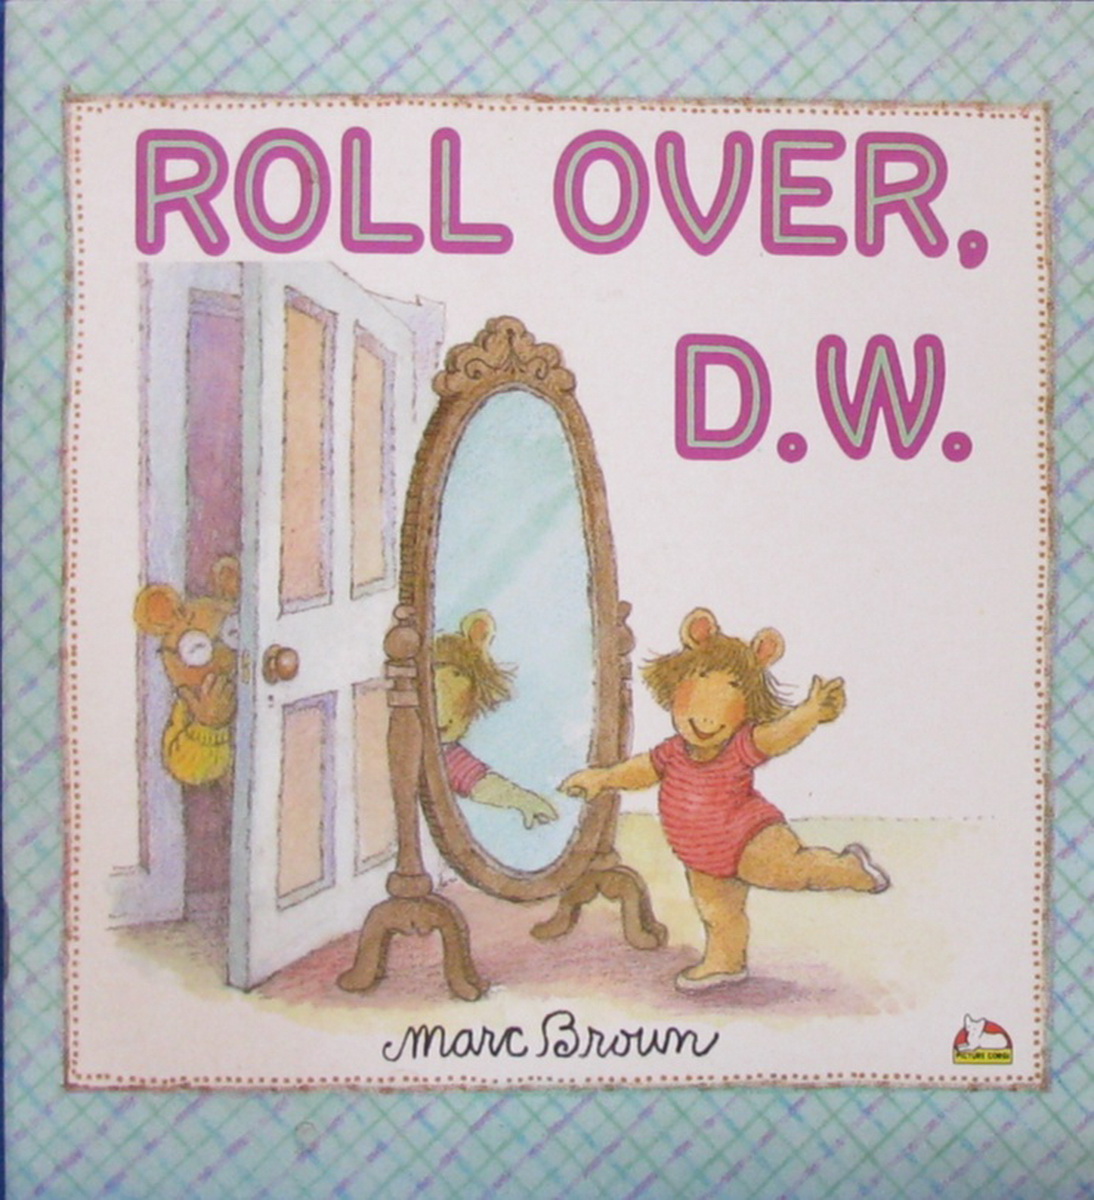 roll over d.w.